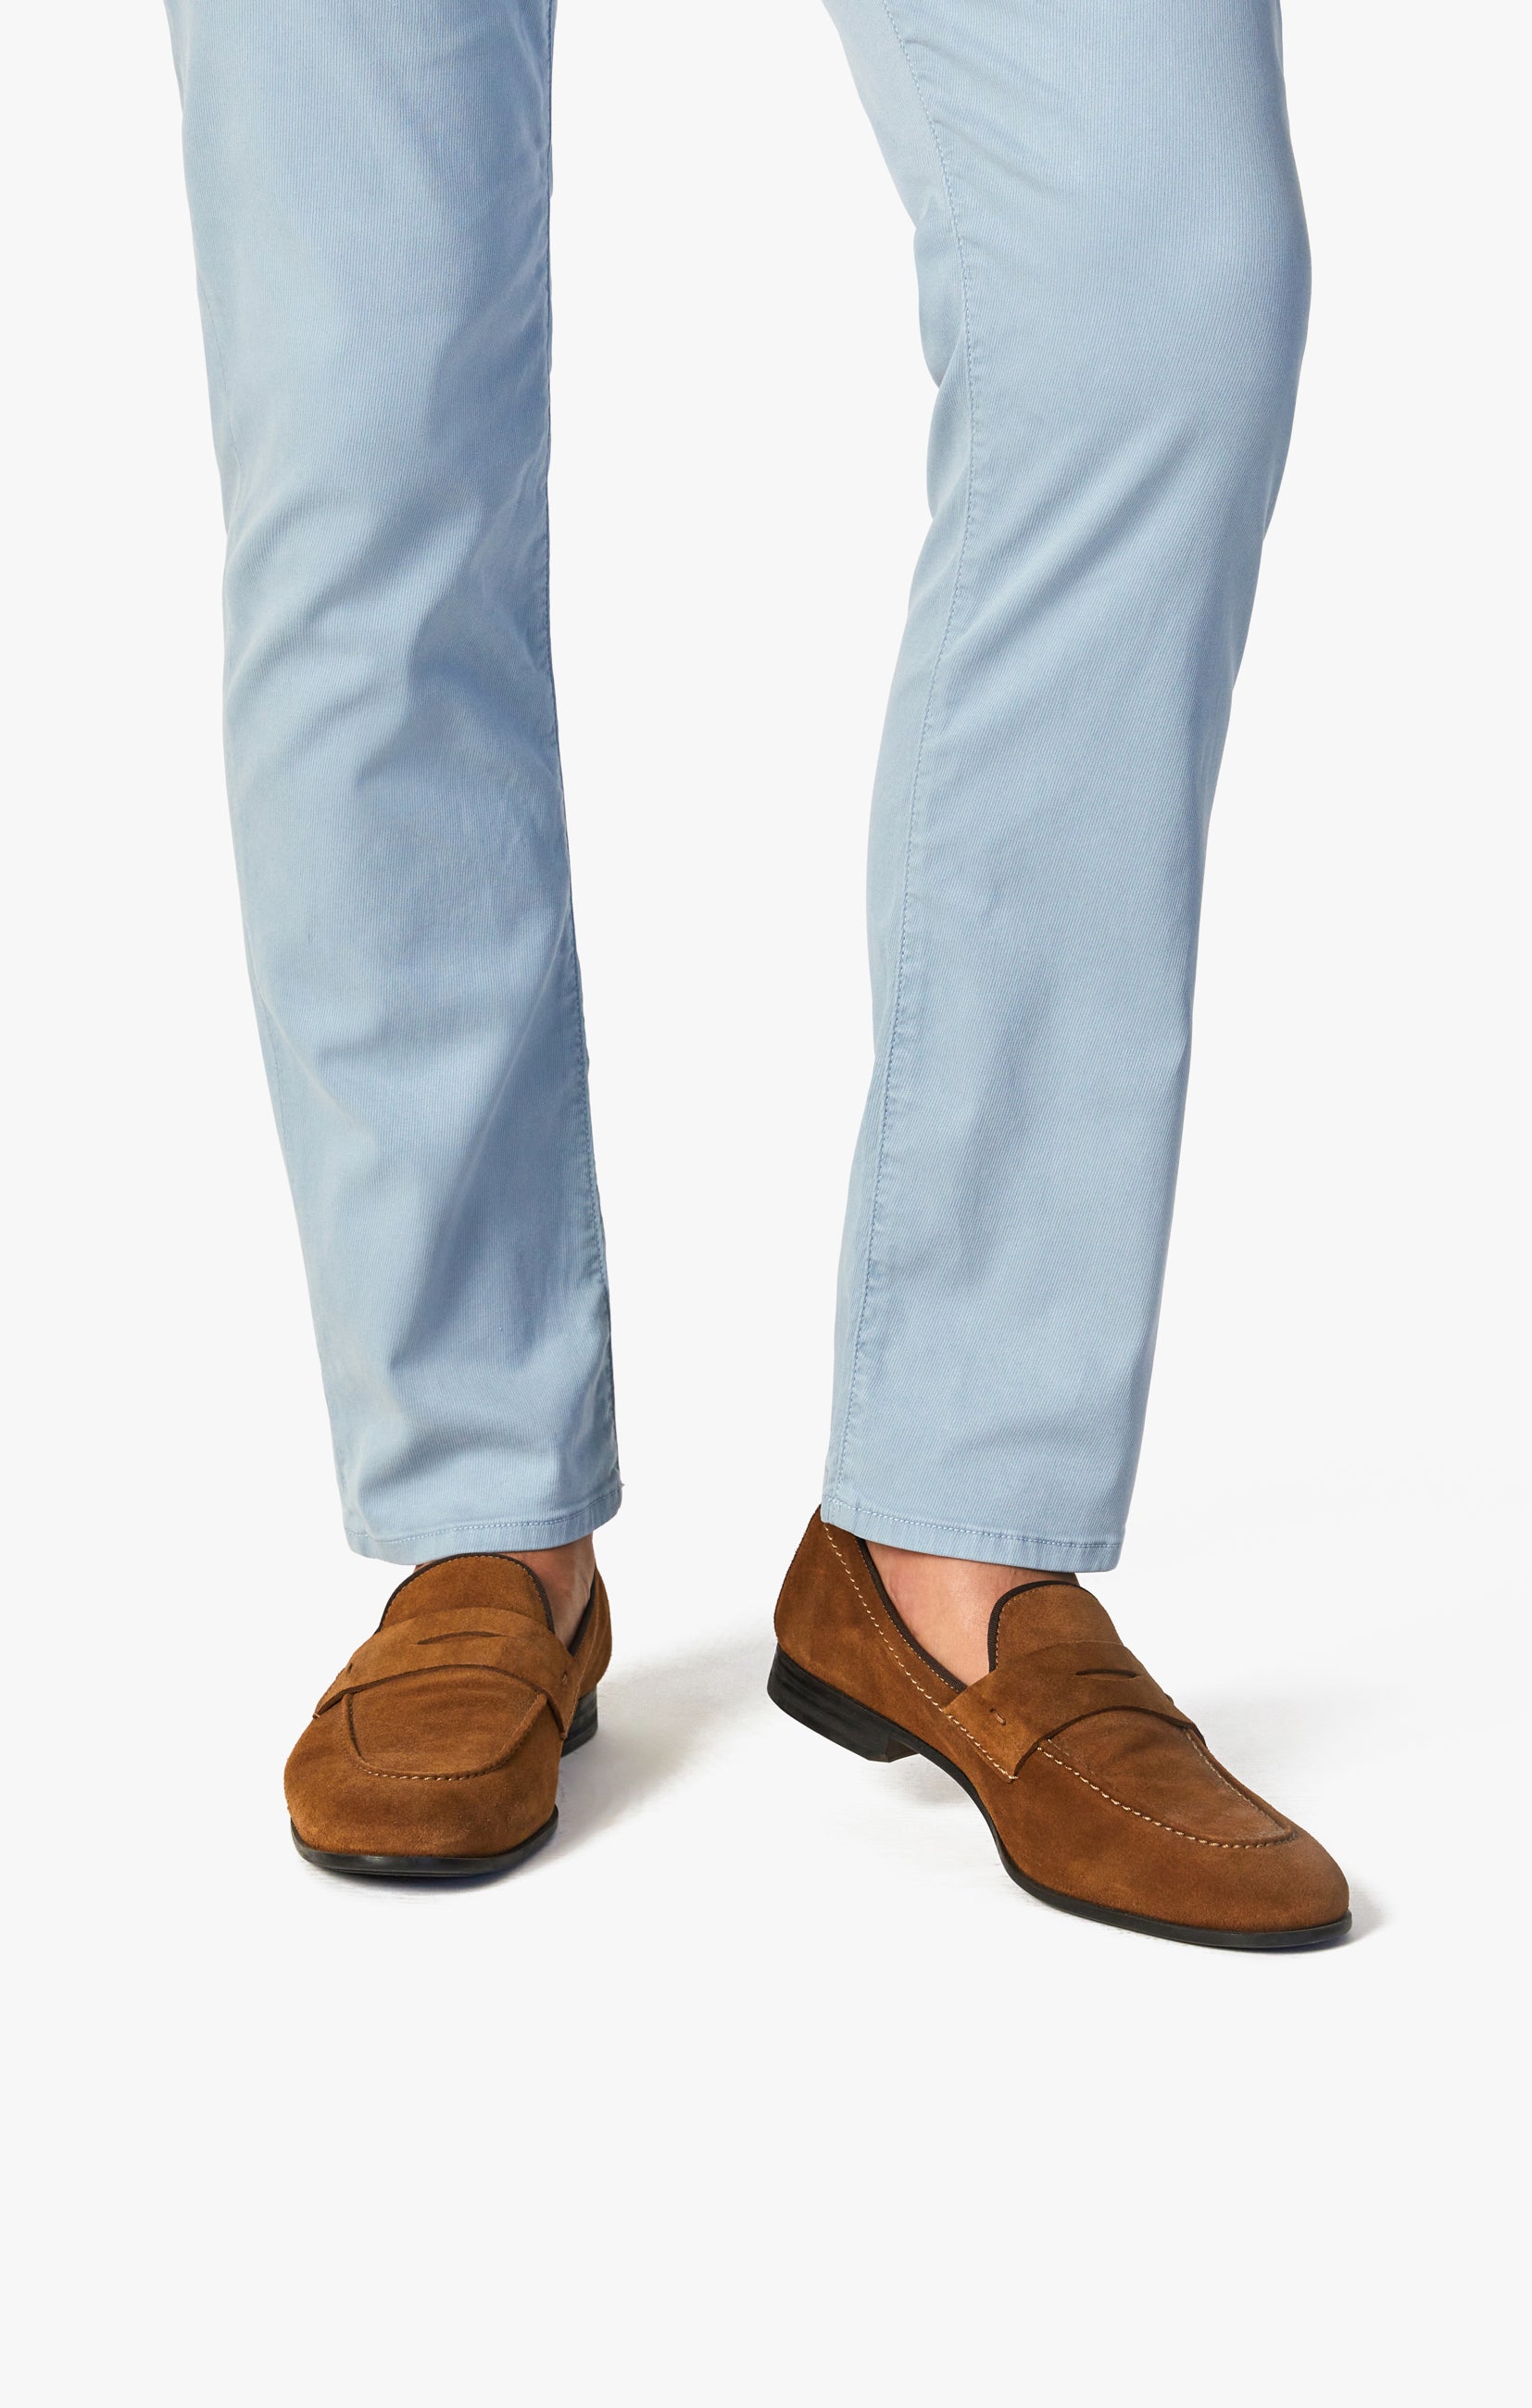 Courage Straight Leg Pants In French Blue Soft Touch Image 5